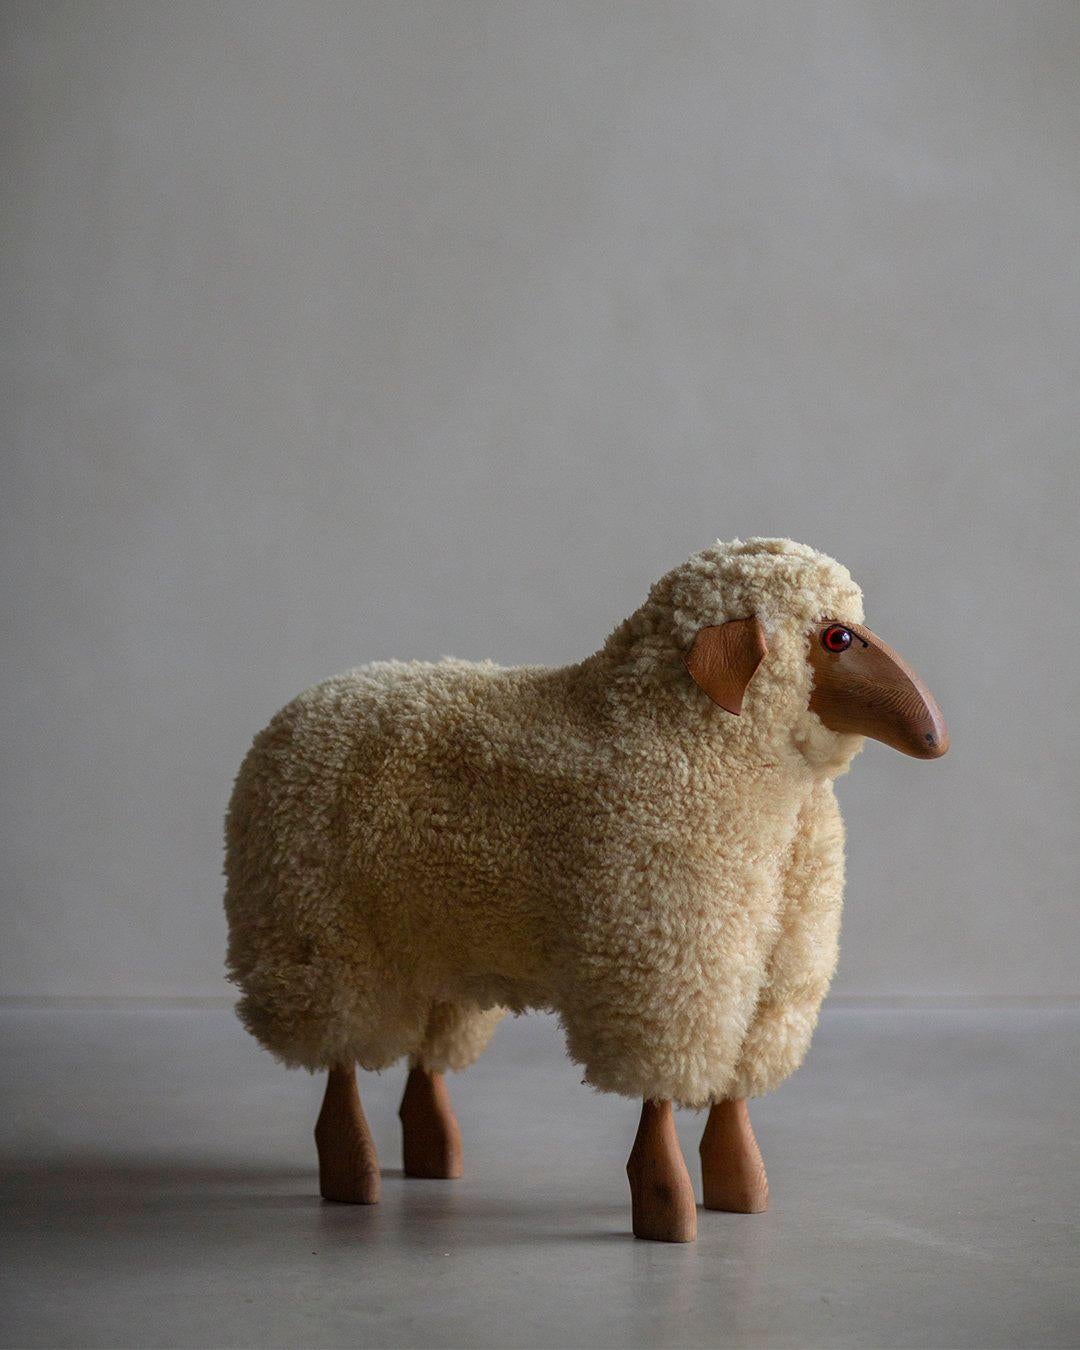 The Hanns-Peter Krafft Wool Sheep Sculpture, an early edition with plenty of vintage charm, was crafted for the German Company Meier. Handmade, this sculpture showcases unique character and attention to detail.

Constructed primarily from beech